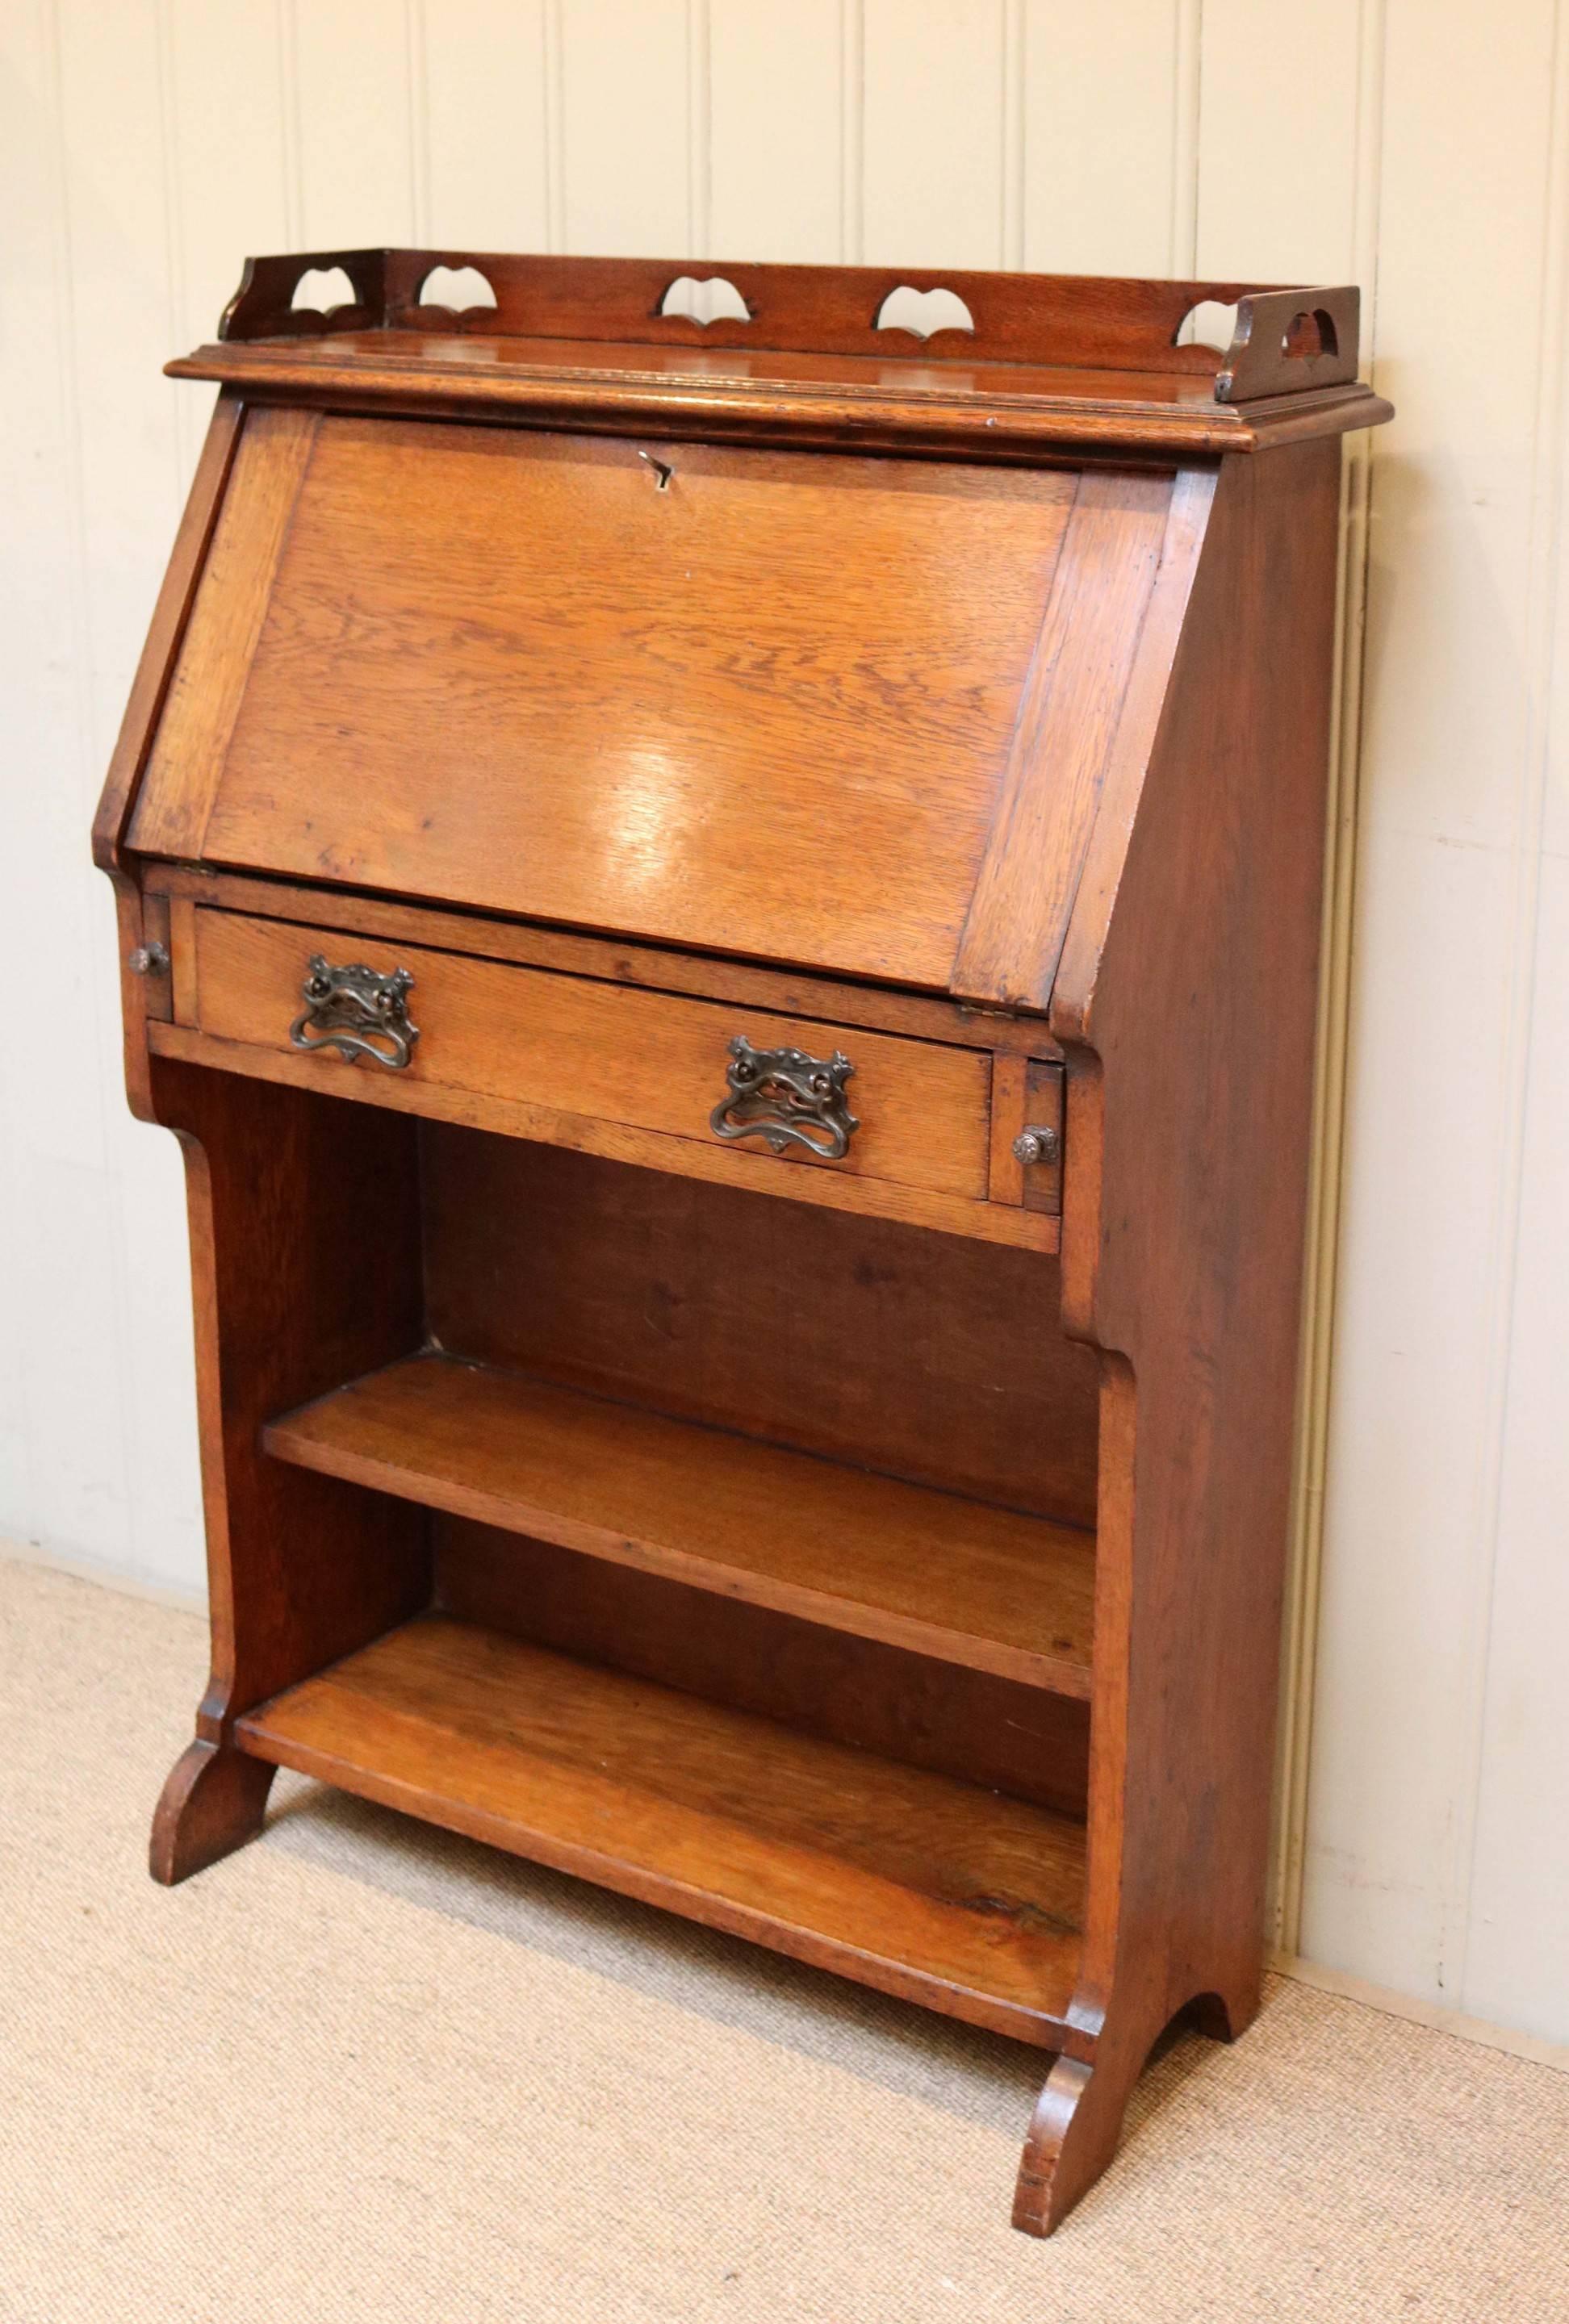 Oak arts and crafts bureau having a fall front which opens to reveal a fitted interior above a single drawer and open bookcase base.